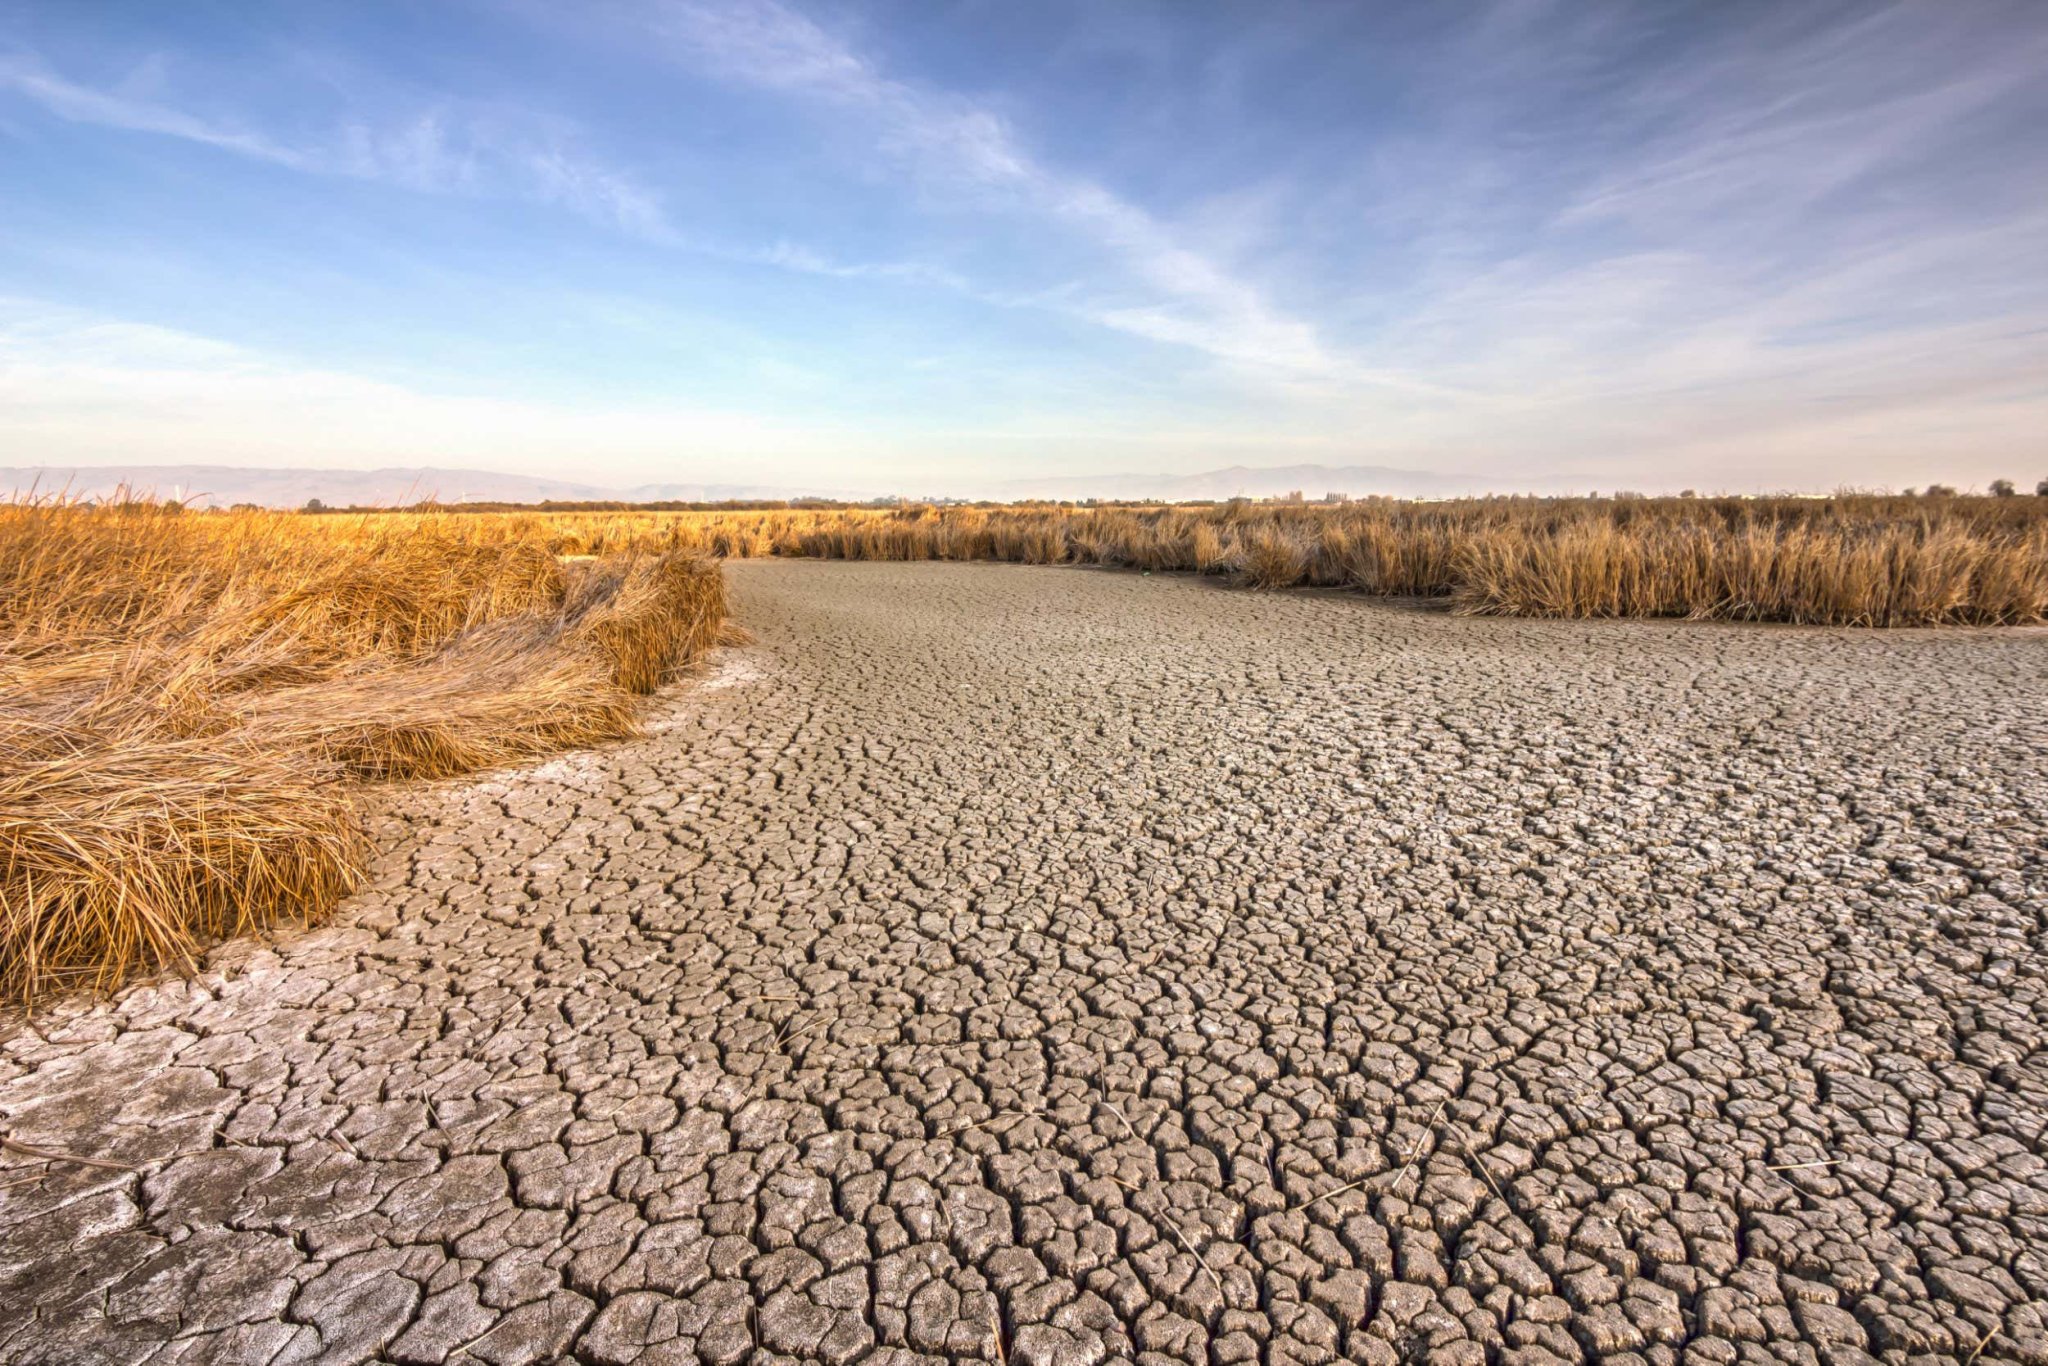 Megadrought could become the new normal in the southwestern US